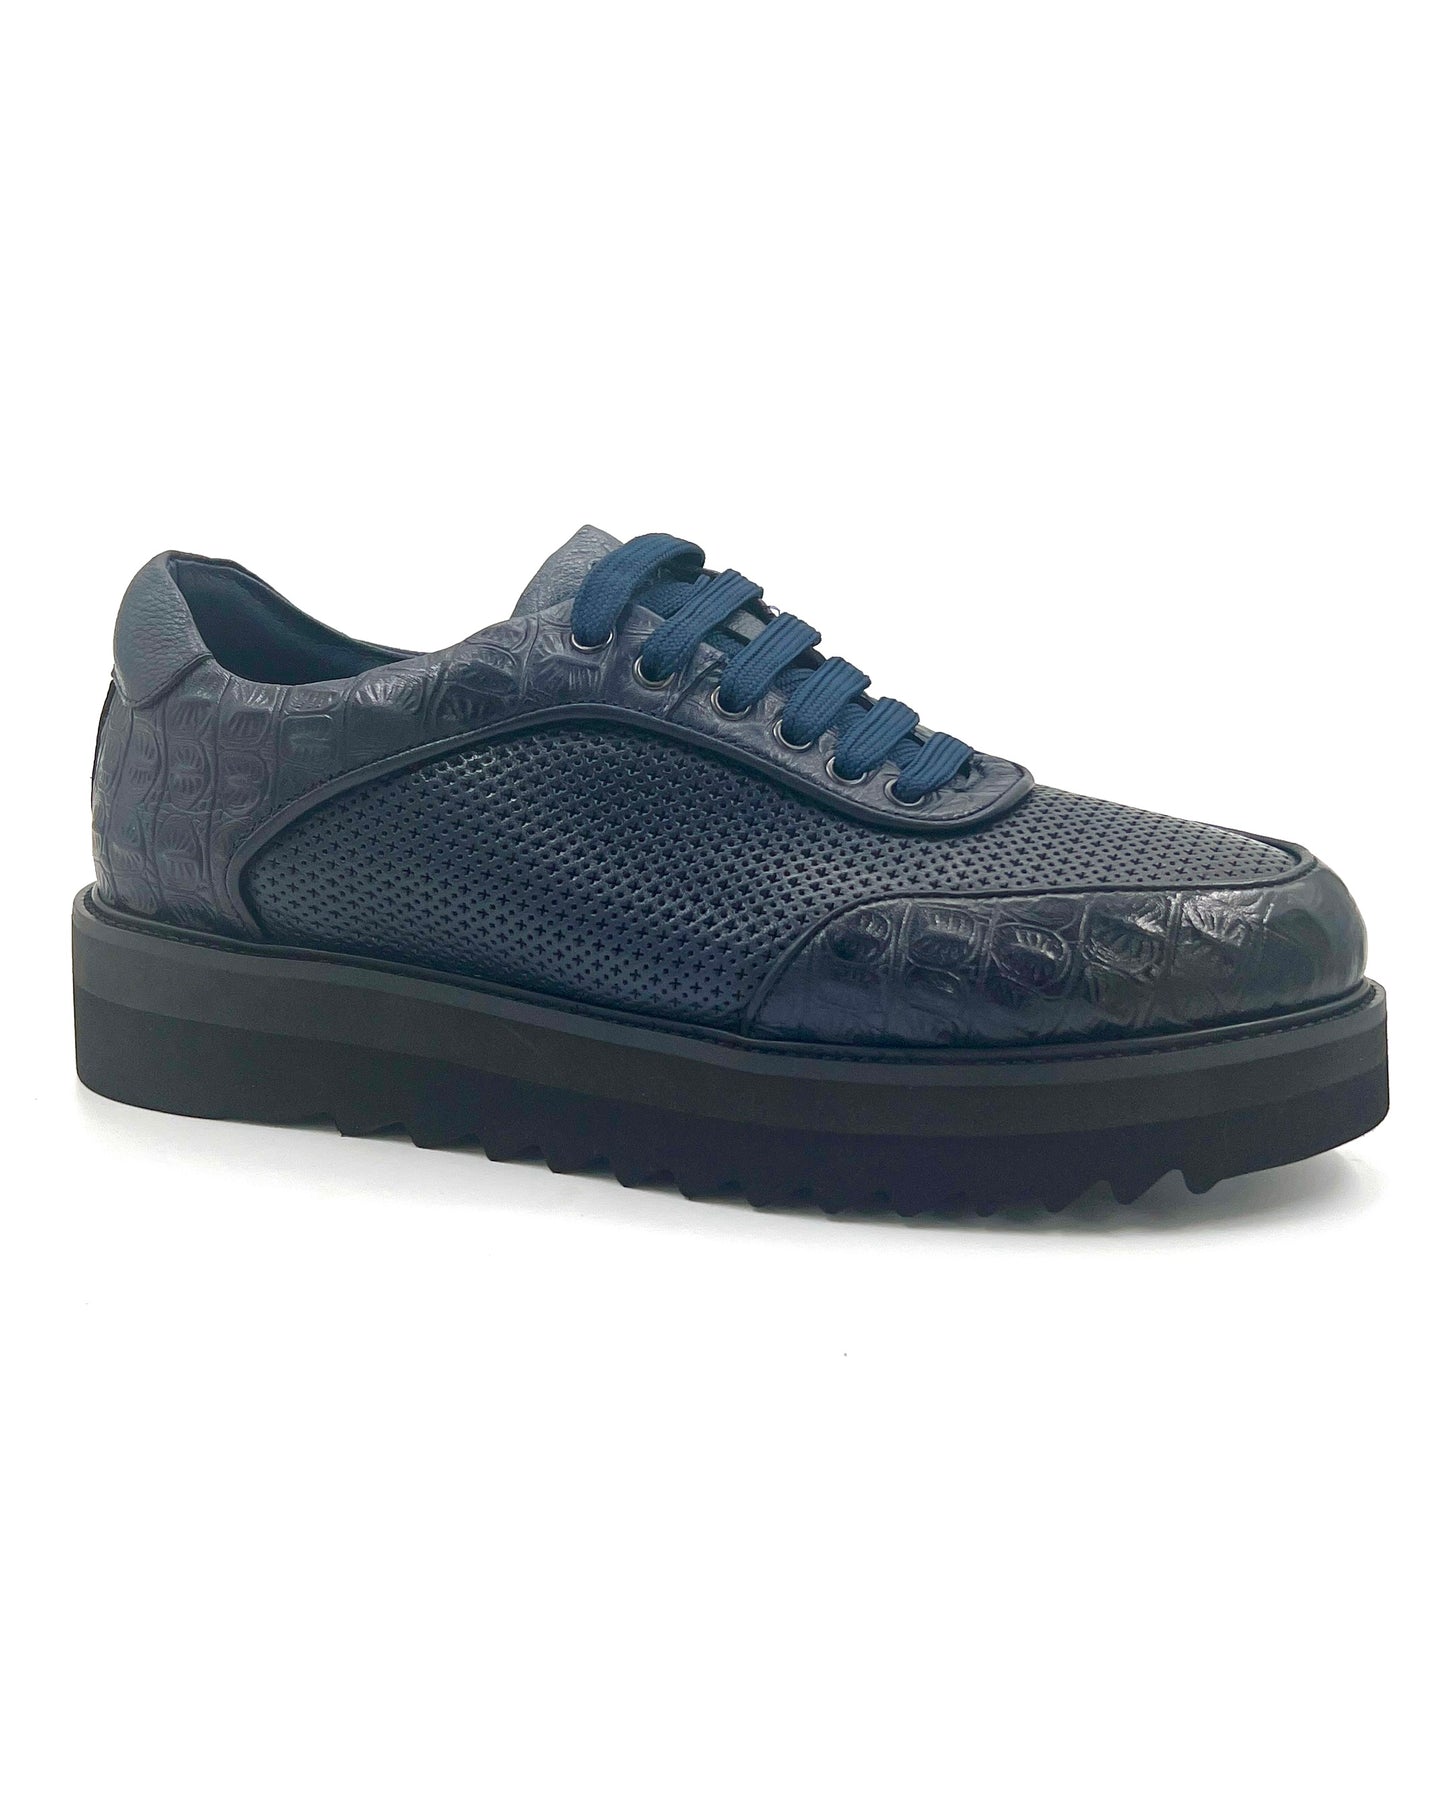 2H #S8042-27-106 Genuine Leather Navy Casual Shoes